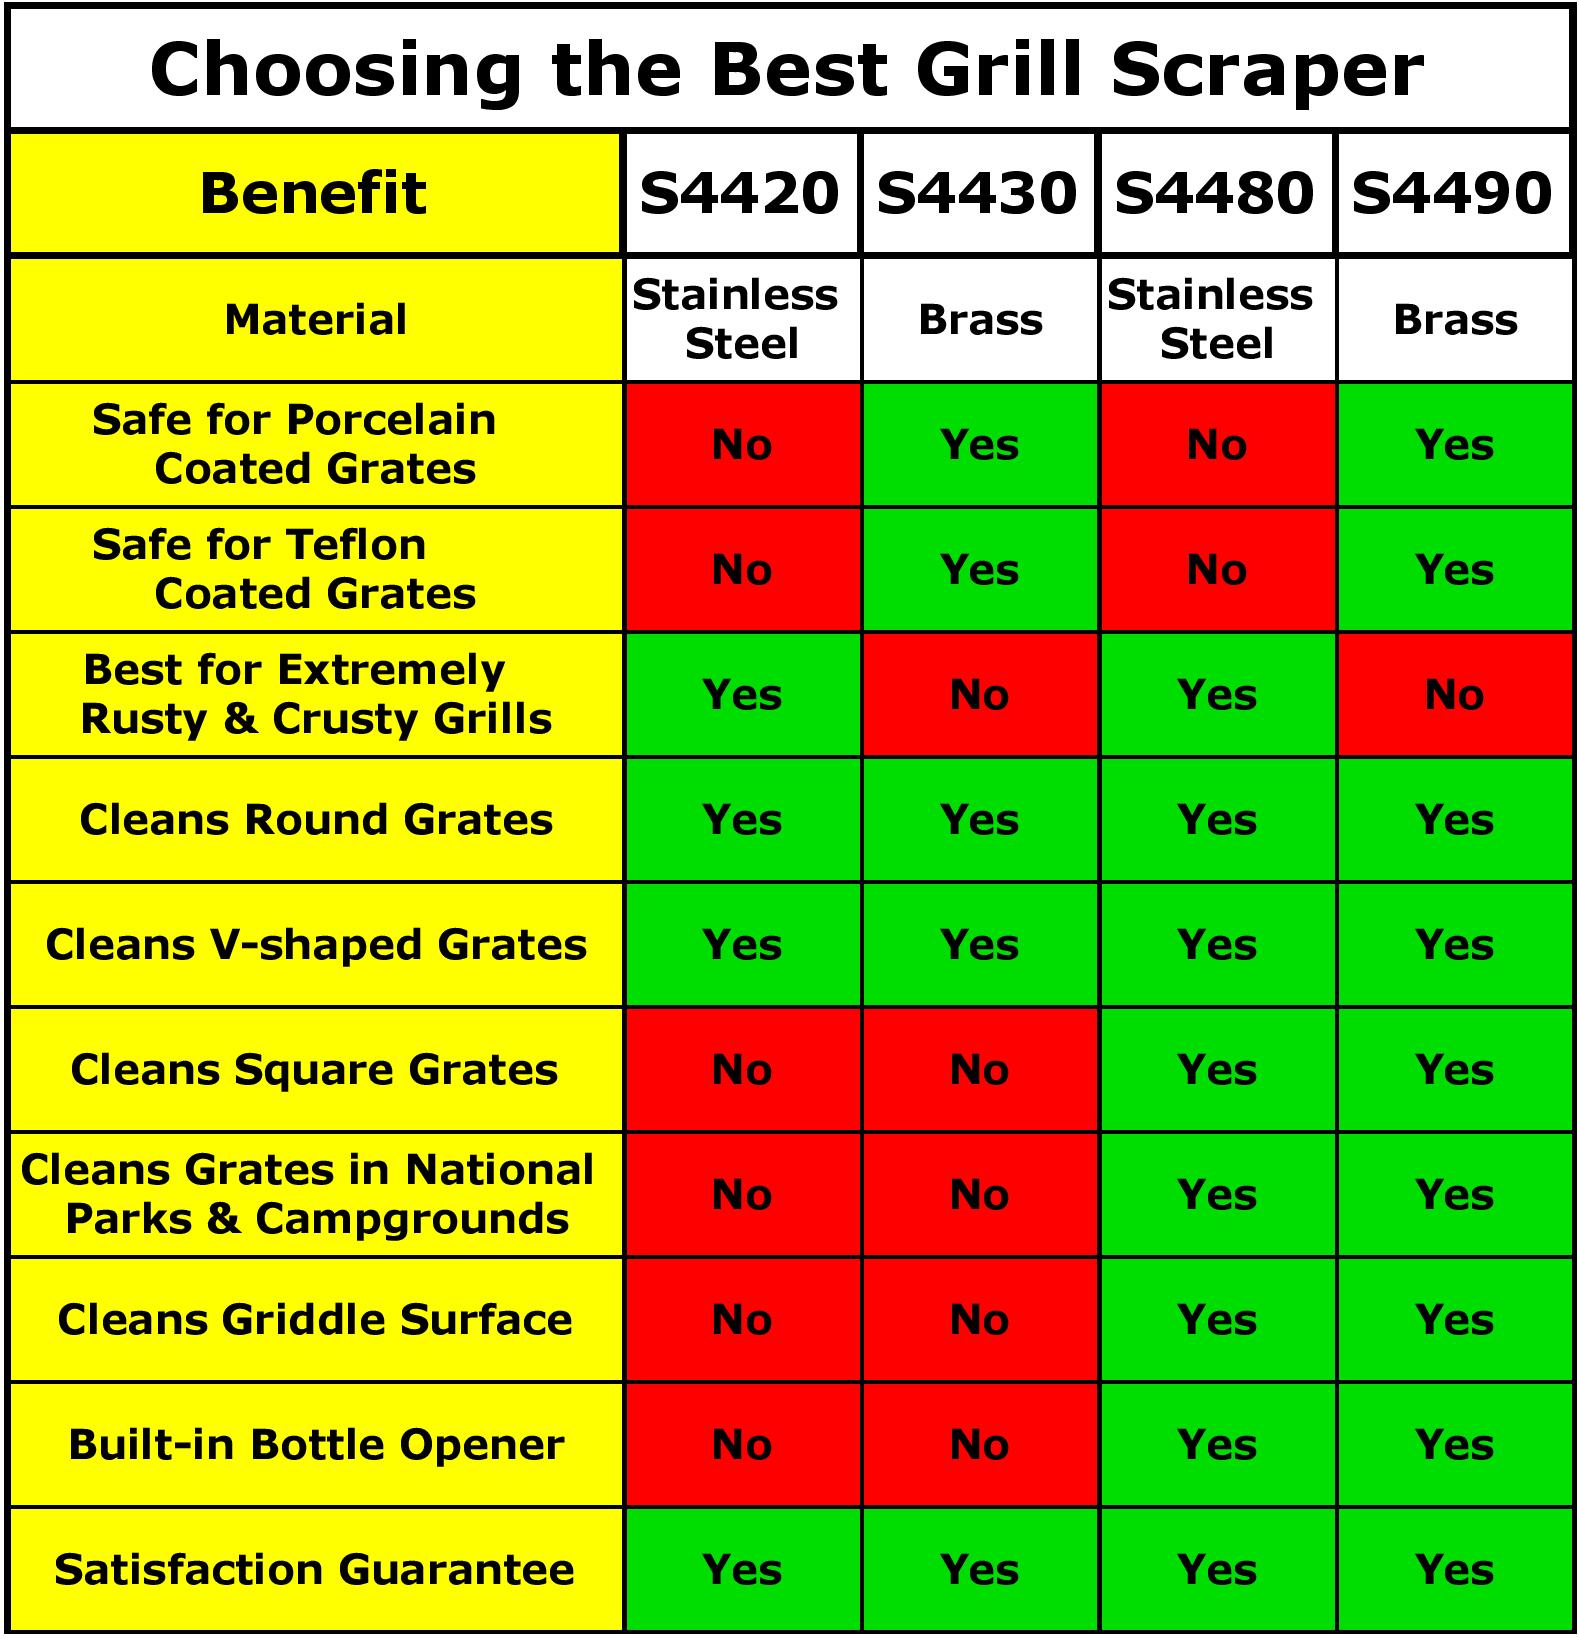 S4480 - The Grate Grill Scraper - Stainless Steel BBQ Grill Tool